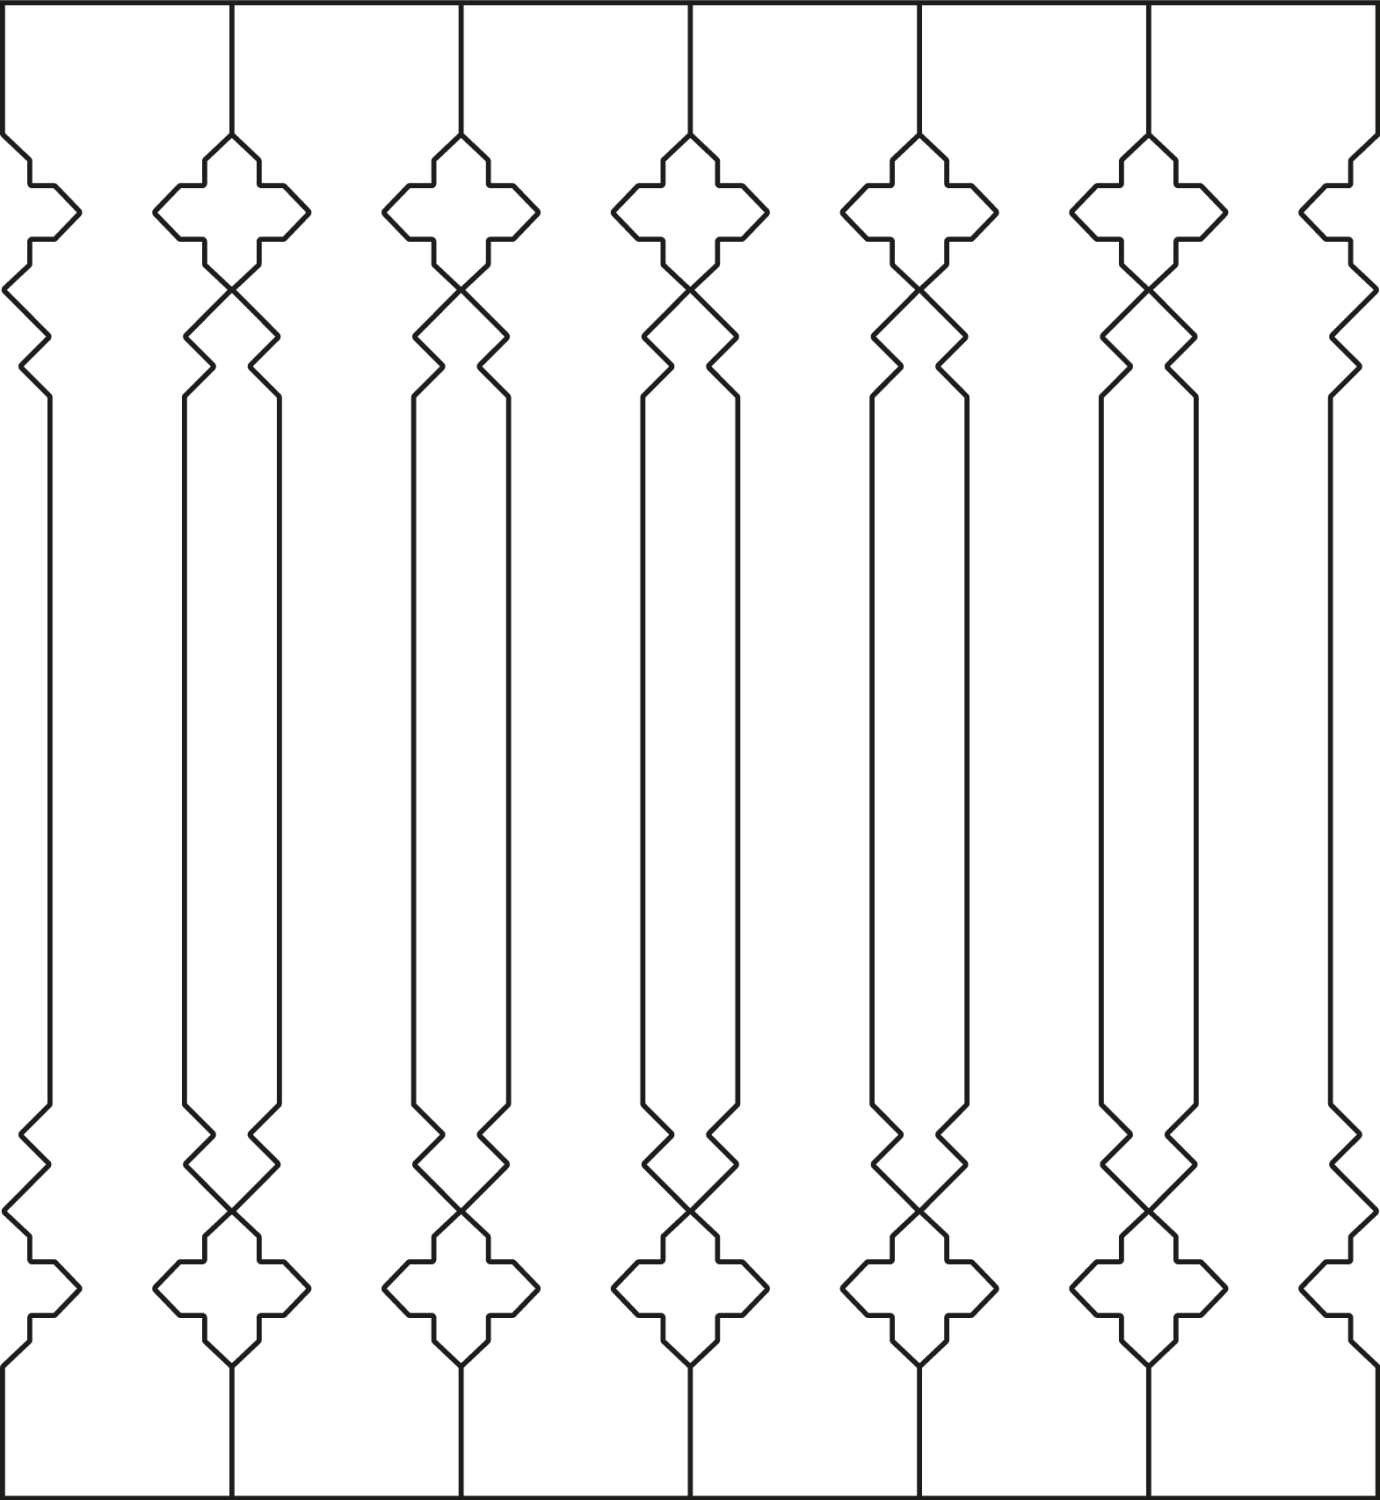 Baluster 011 - The drawing shows 6 Decorative victorian sawn balusters & pickets together